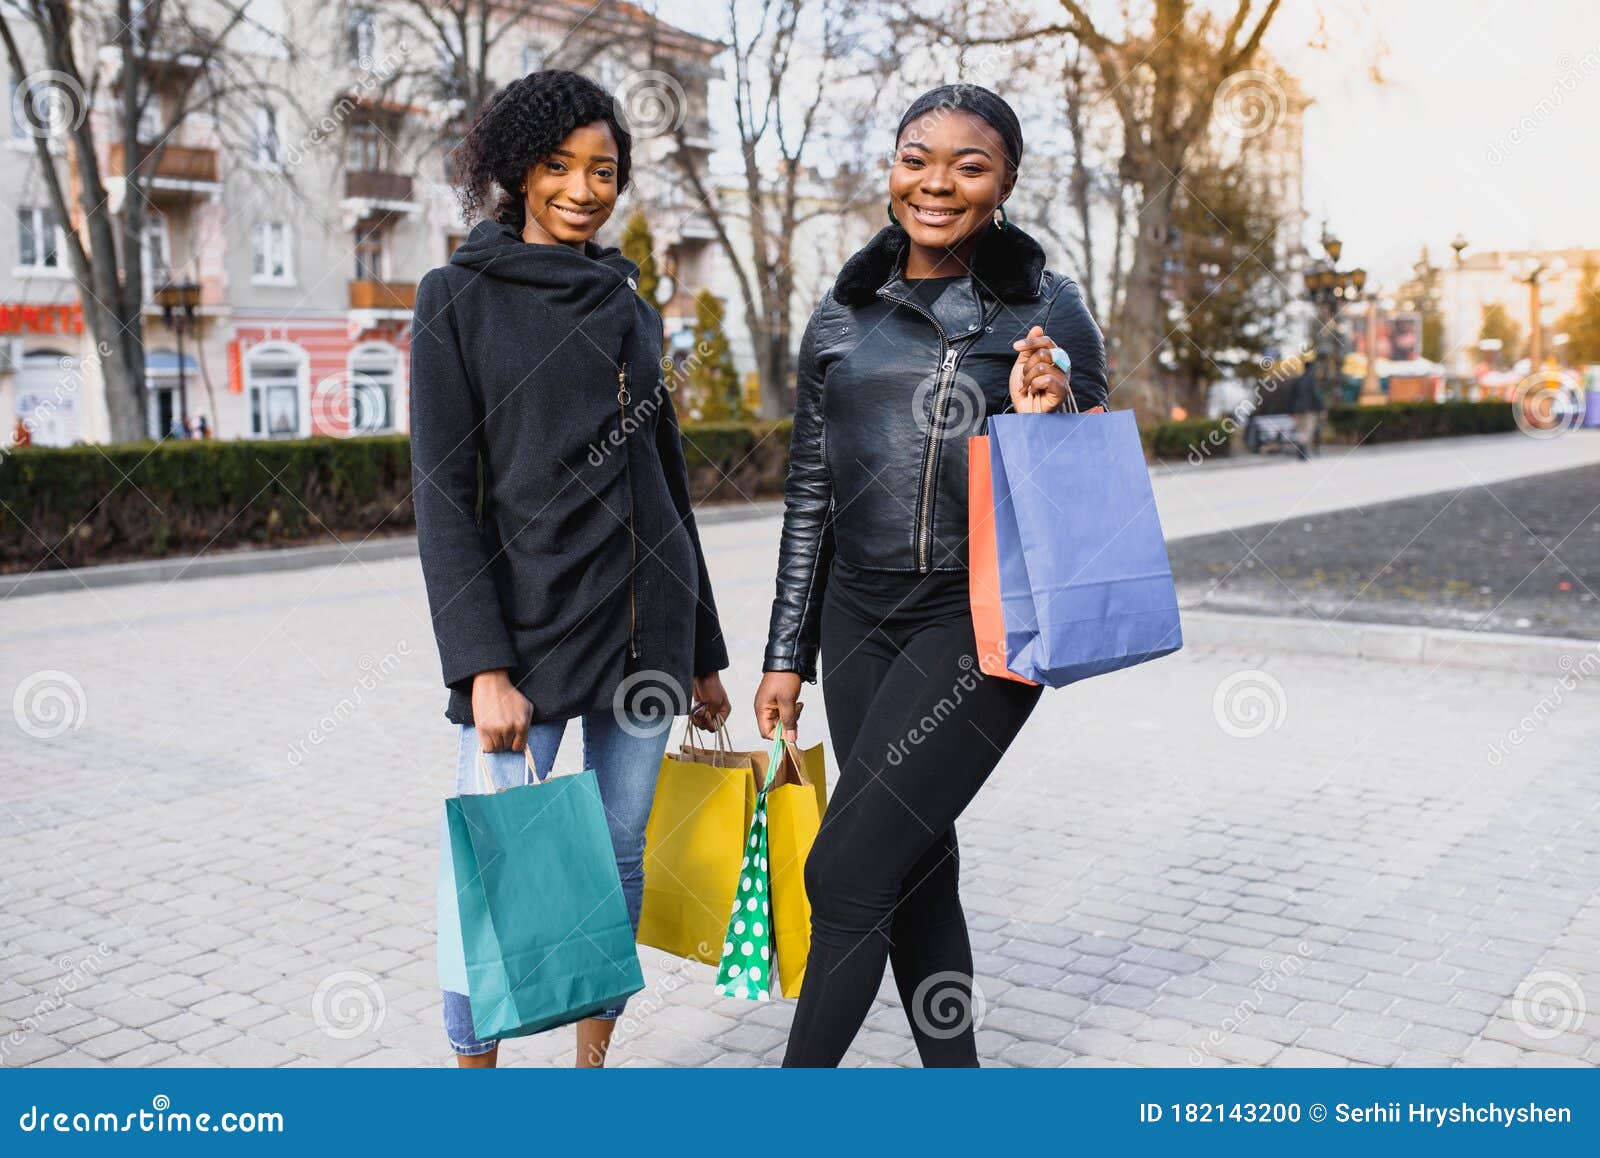 Two Women Friends in the City on a Shopping Trip Carrying Colorful ...